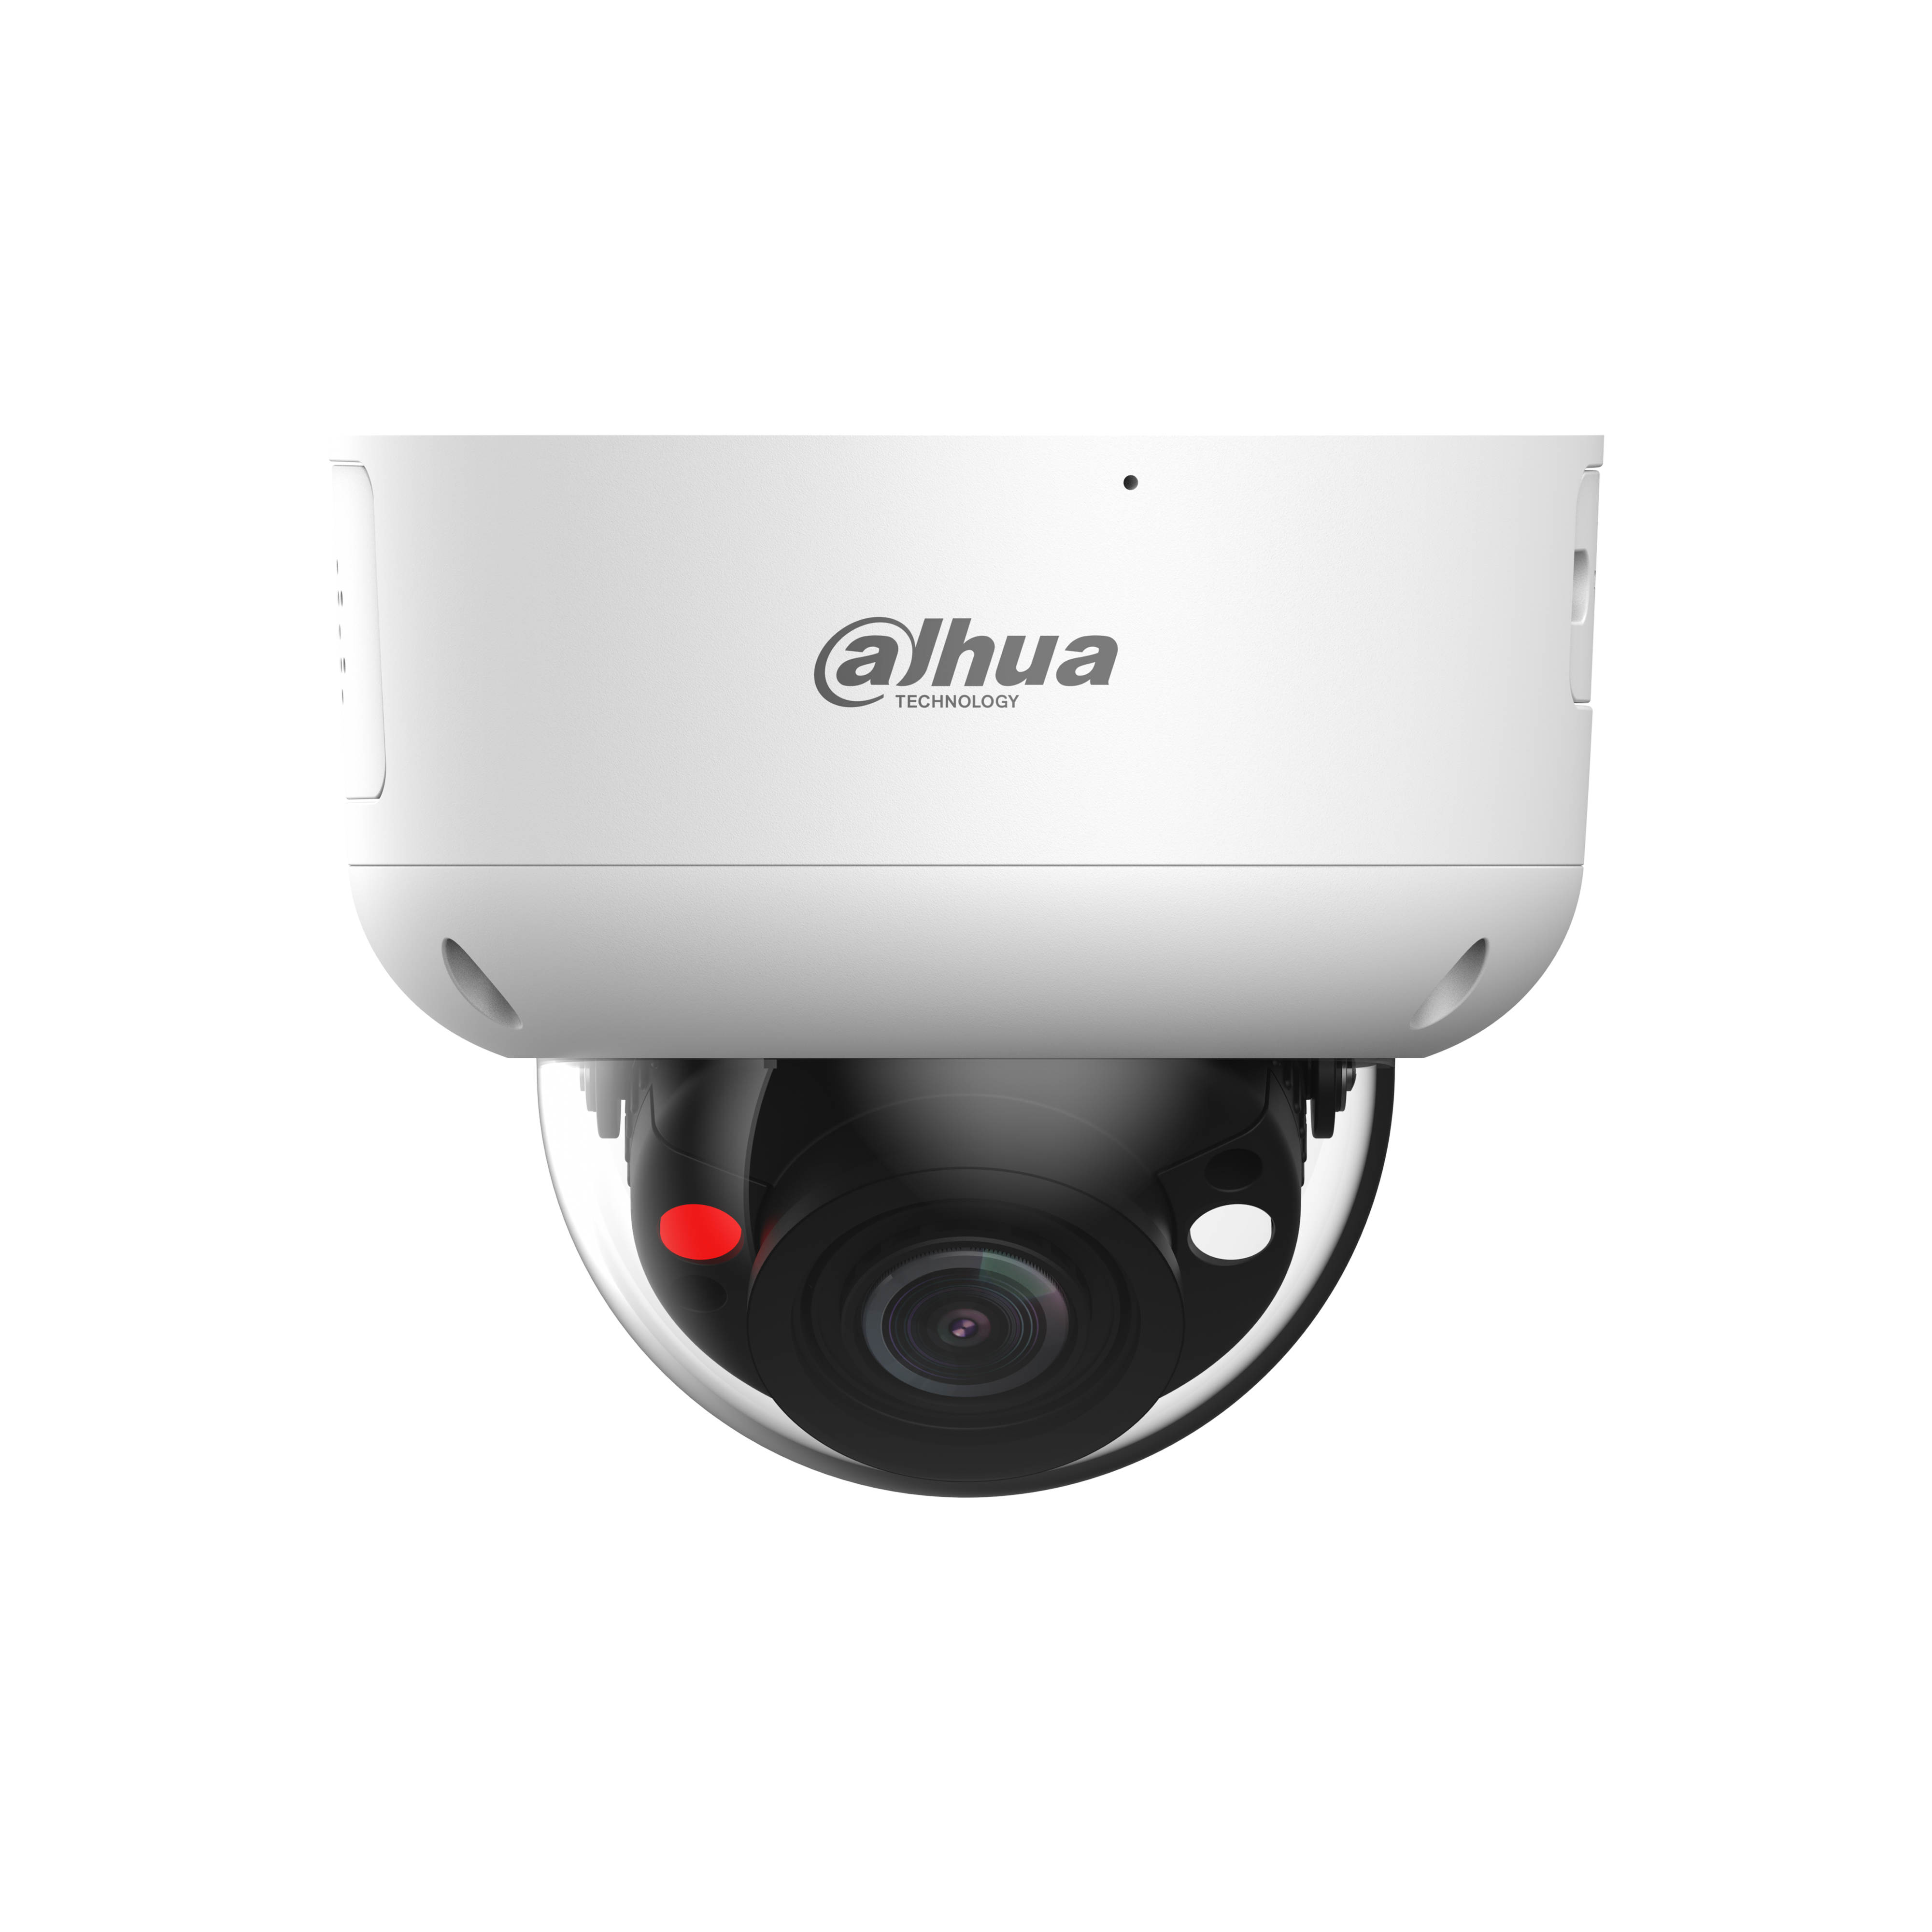 WIZSENSE SERIES IP CAMERA WHITE AI TIOC 5MP H.264/4+/5/5+ DOME 120 WDR METAL 2.7-13.5MM MOTORISED LENS 5X ZOOM FULL COLOUR IR+WHITE LED 40M POE IP67 BUILT IN MIC AUDIO IN AUDIO OUT 1 x ALARM IN 1 x ALARM OUT SUPPORT UP TO 256GB SD IK10 12VDC